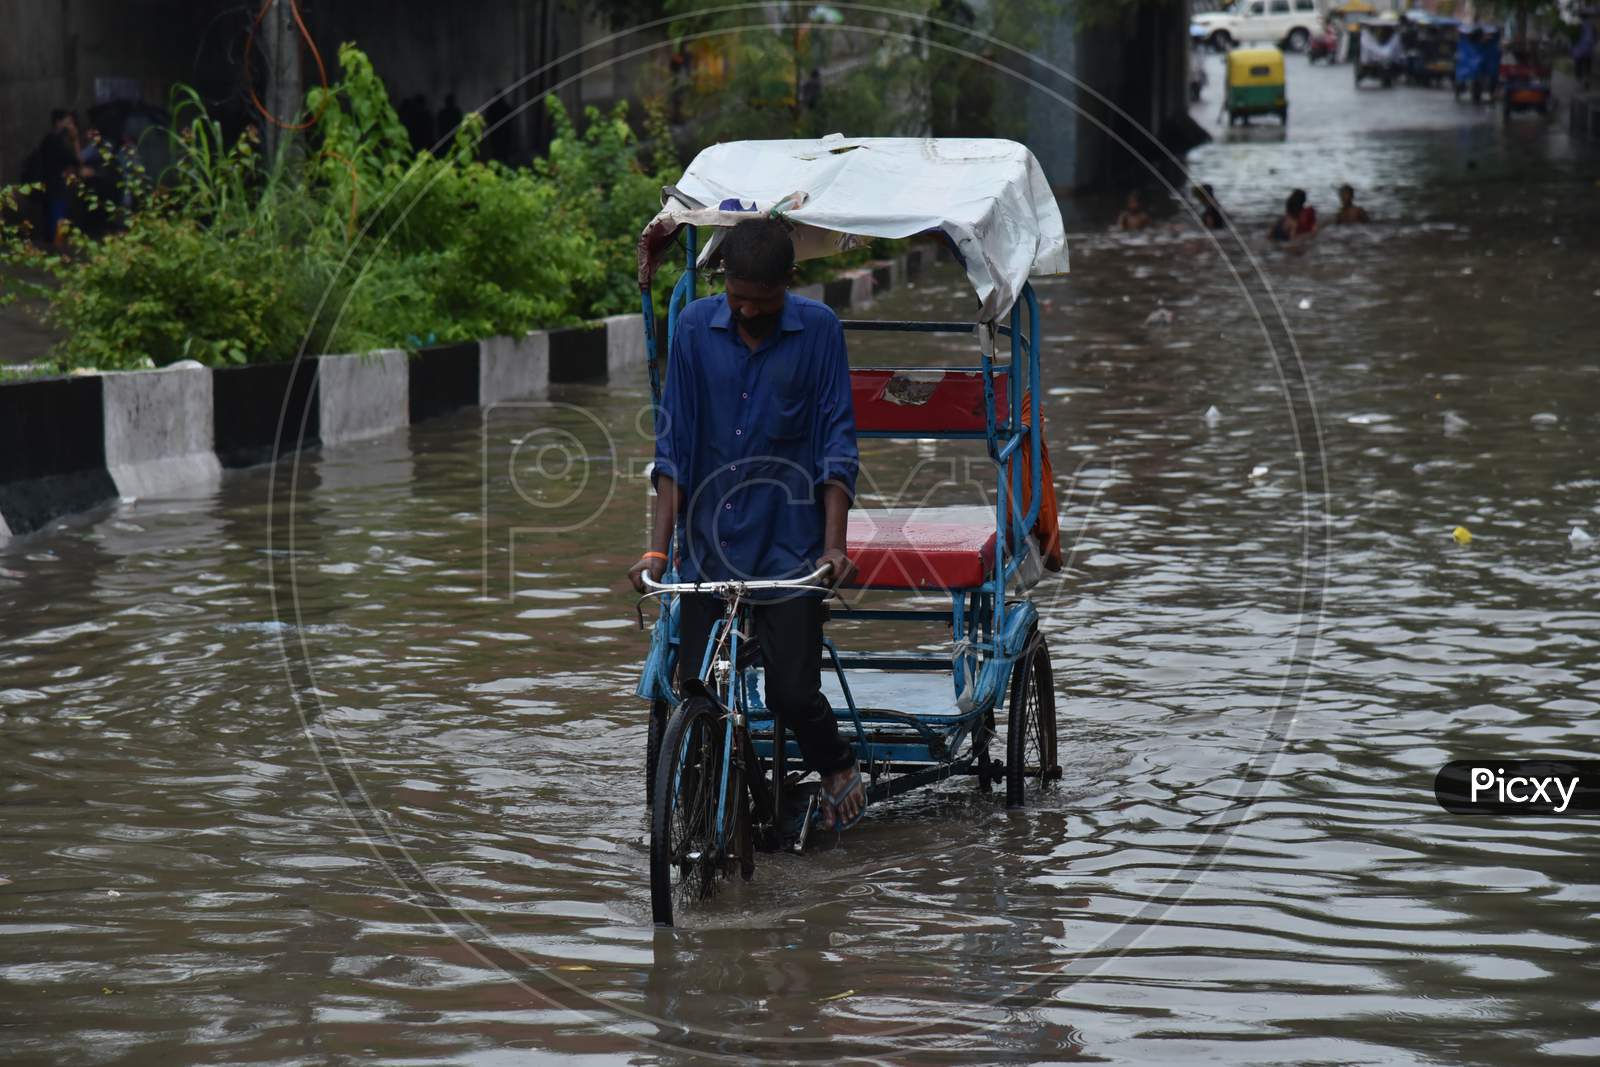 A man crosses a flooded street during heavy rains in New Delhi, India, August 19, 2020.